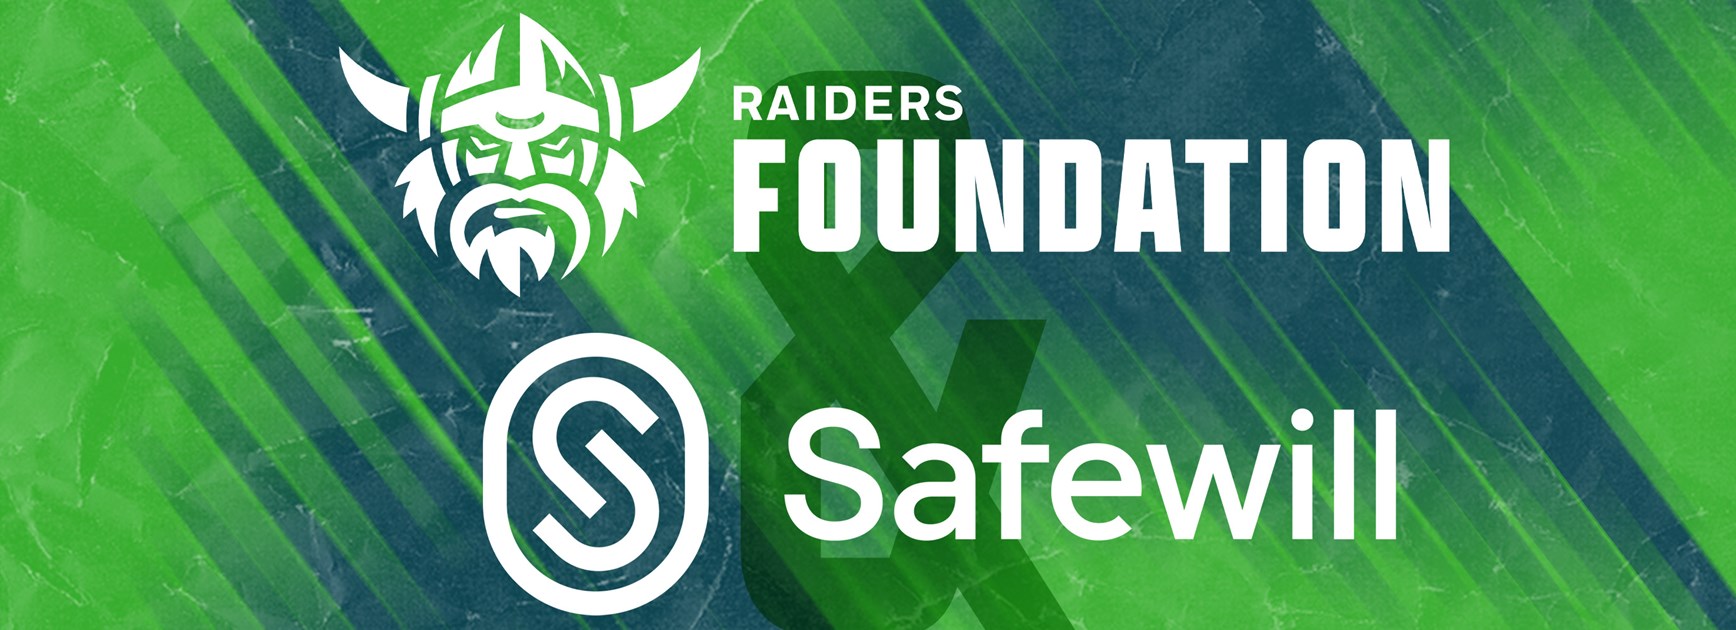 Raiders partner with Safewill